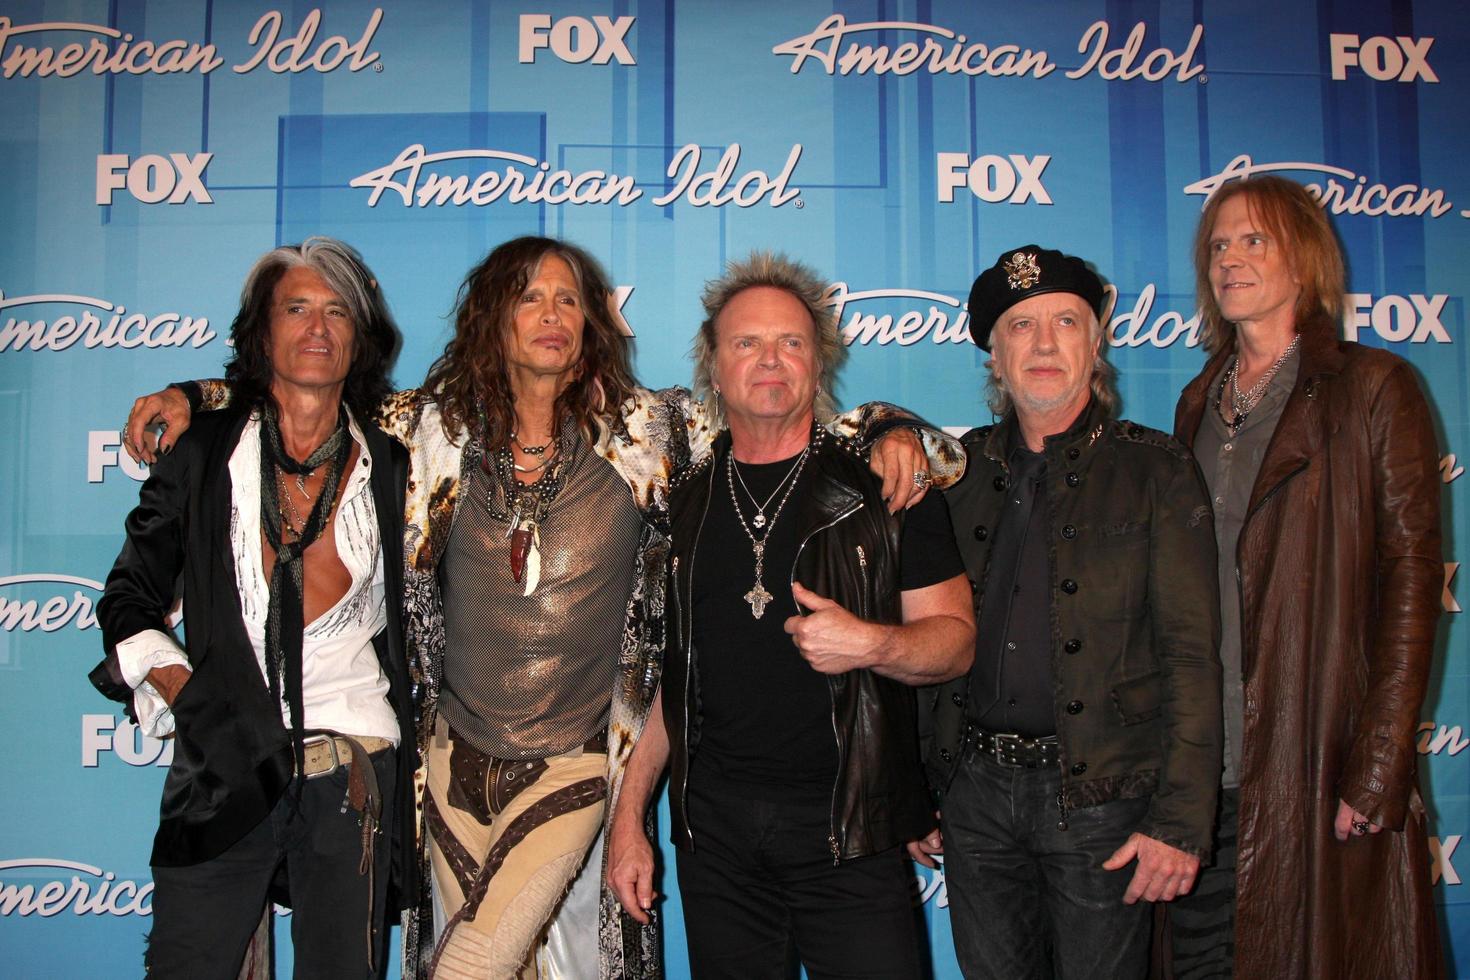 LOS ANGELES  MAY 23 - Aerosmith   L R  Musicians Joe Perry, Steven Tyler, Joey Kramer, Brad Whitford, and Tom Hamilton in the Press Room of the American Idol 2012 Finale at Nokia Theater on May 23, 2012 in Los Angeles, CA photo